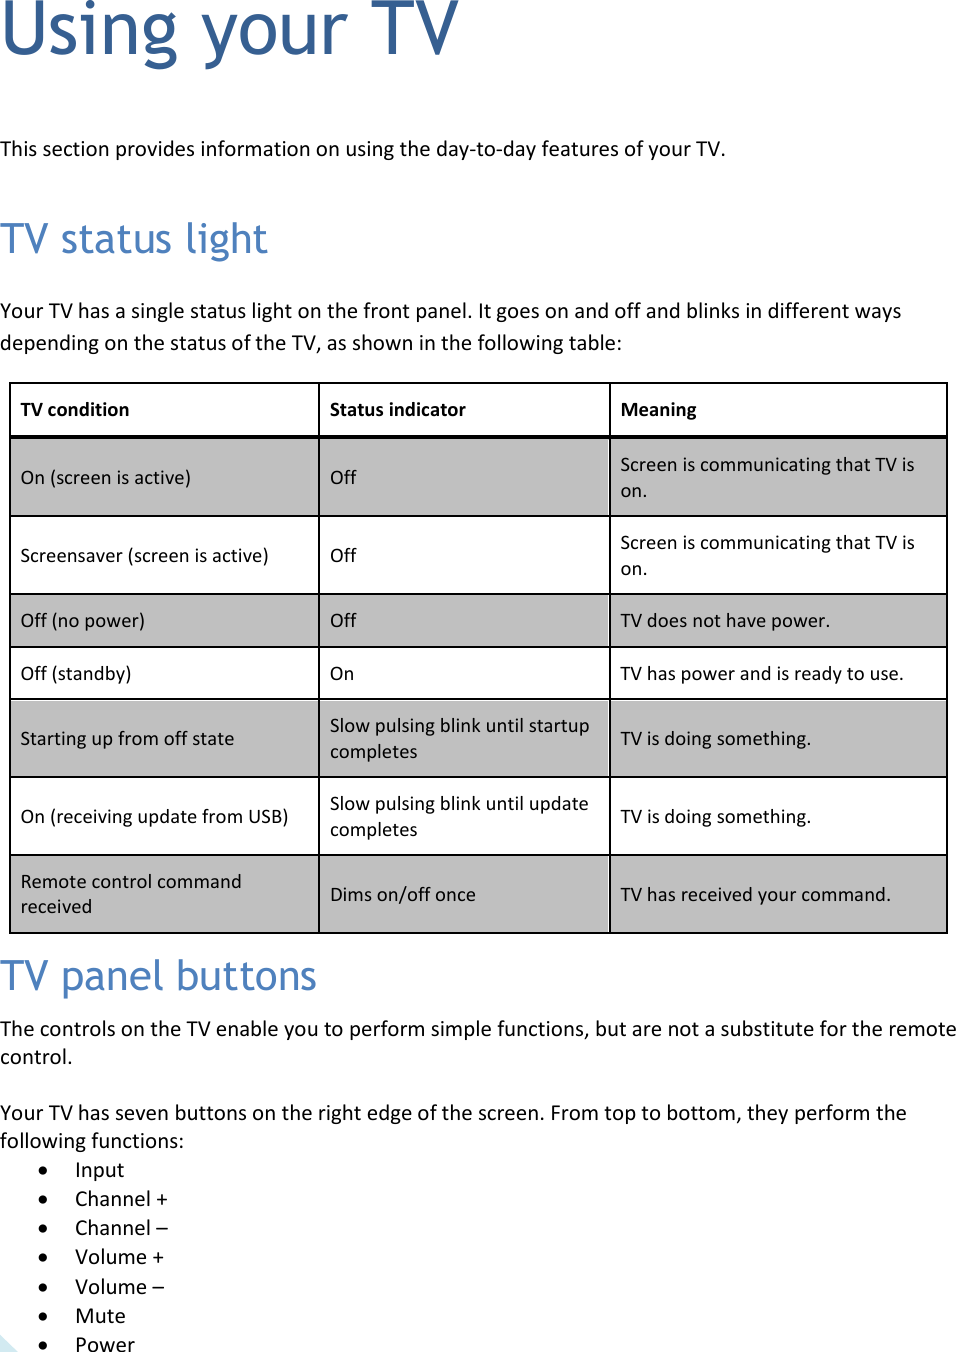   26 Using your TV This section provides information on using the day-to-day features of your TV. TV status light Your TV has a single status light on the front panel. It goes on and off and blinks in different ways depending on the status of the TV, as shown in the following table: TV condition Status indicator Meaning On (screen is active) Off Screen is communicating that TV is on. Screensaver (screen is active) Off Screen is communicating that TV is on. Off (no power) Off TV does not have power. Off (standby) On TV has power and is ready to use. Starting up from off state Slow pulsing blink until startup completes TV is doing something. On (receiving update from USB) Slow pulsing blink until update completes TV is doing something. Remote control command received Dims on/off once TV has received your command. TV panel buttons The controls on the TV enable you to perform simple functions, but are not a substitute for the remote control.  Your TV has seven buttons on the right edge of the screen. From top to bottom, they perform the following functions: • Input • Channel + • Channel –  • Volume + • Volume –  • Mute • Power 